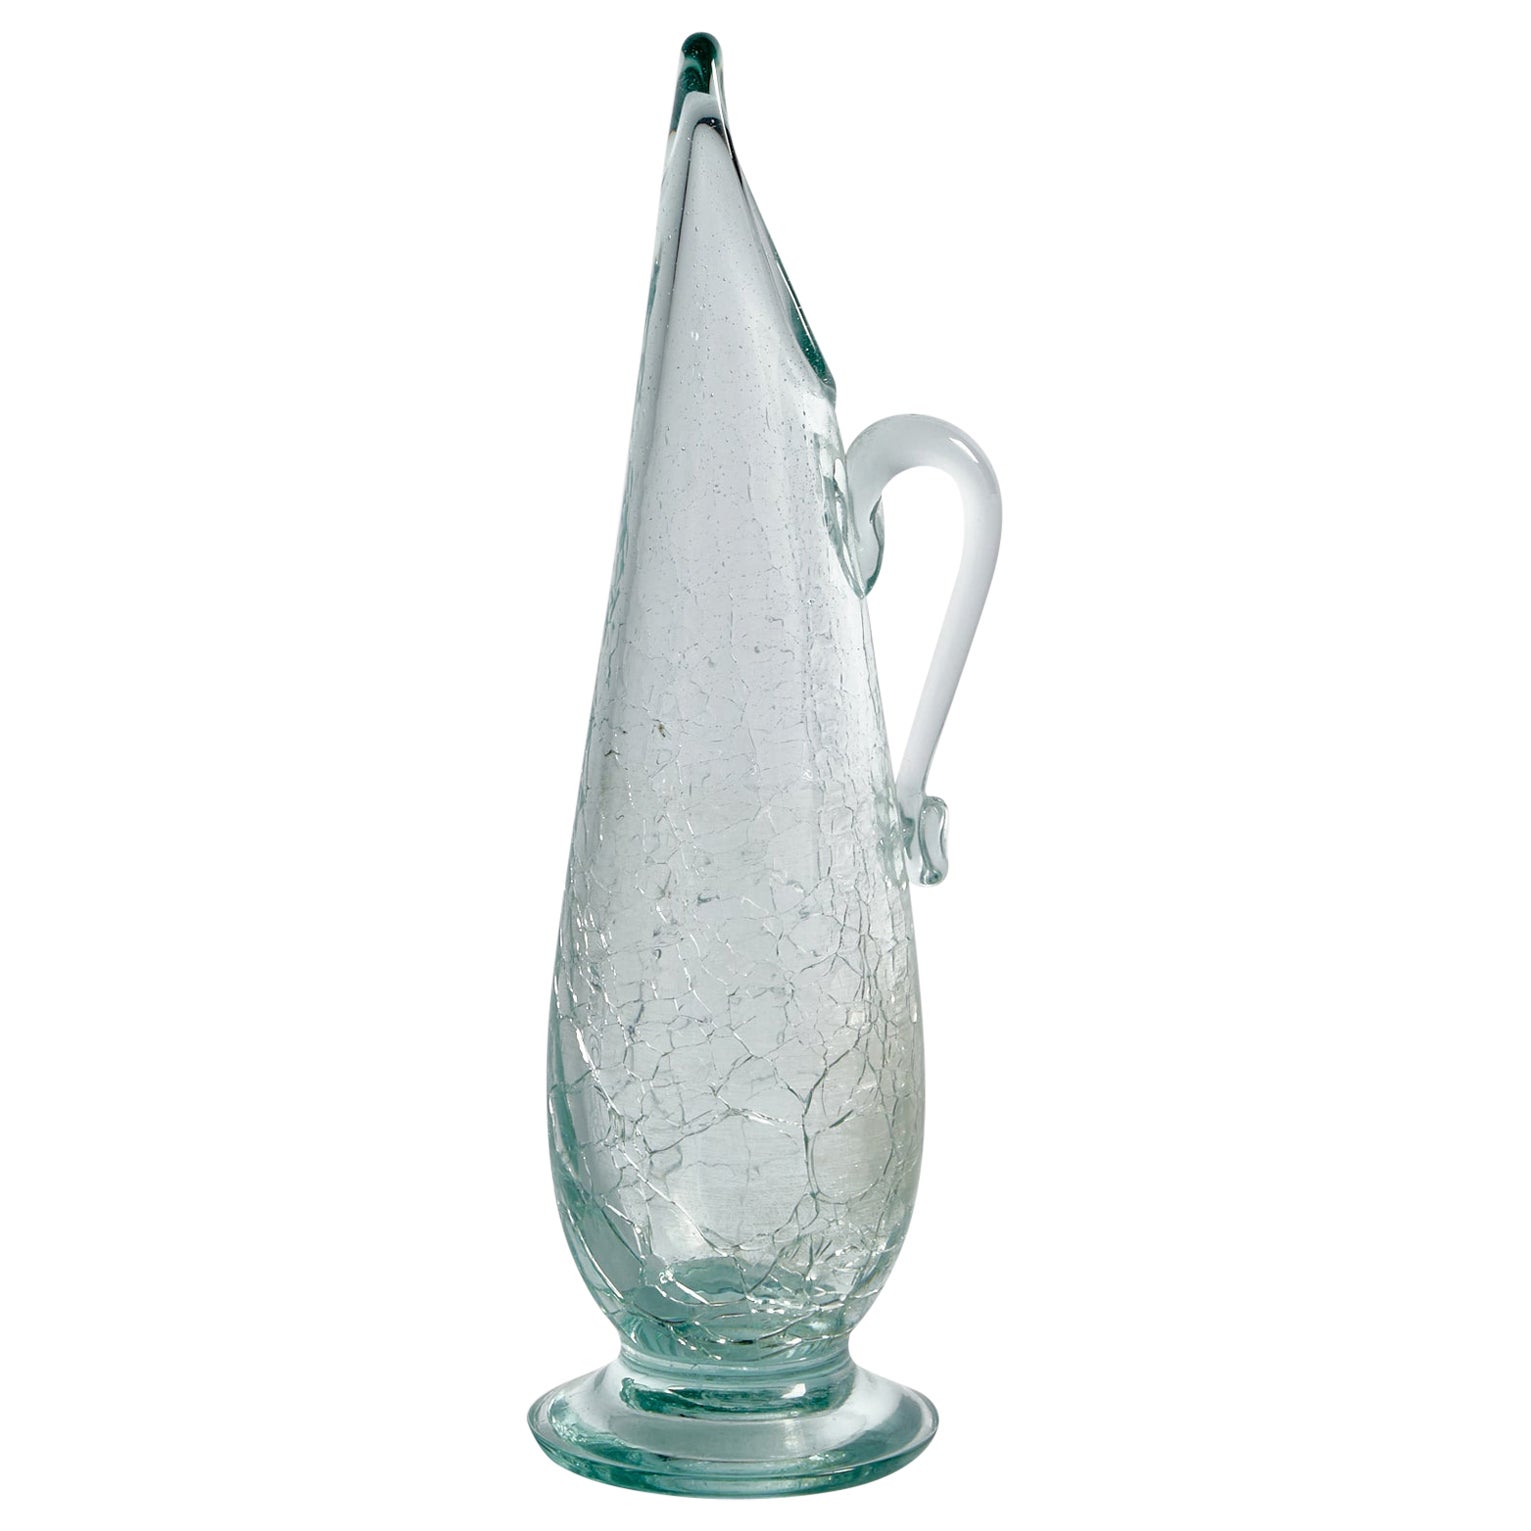 Ture Berglund, Small Pitcher, Glass, Sweden, 1940s For Sale